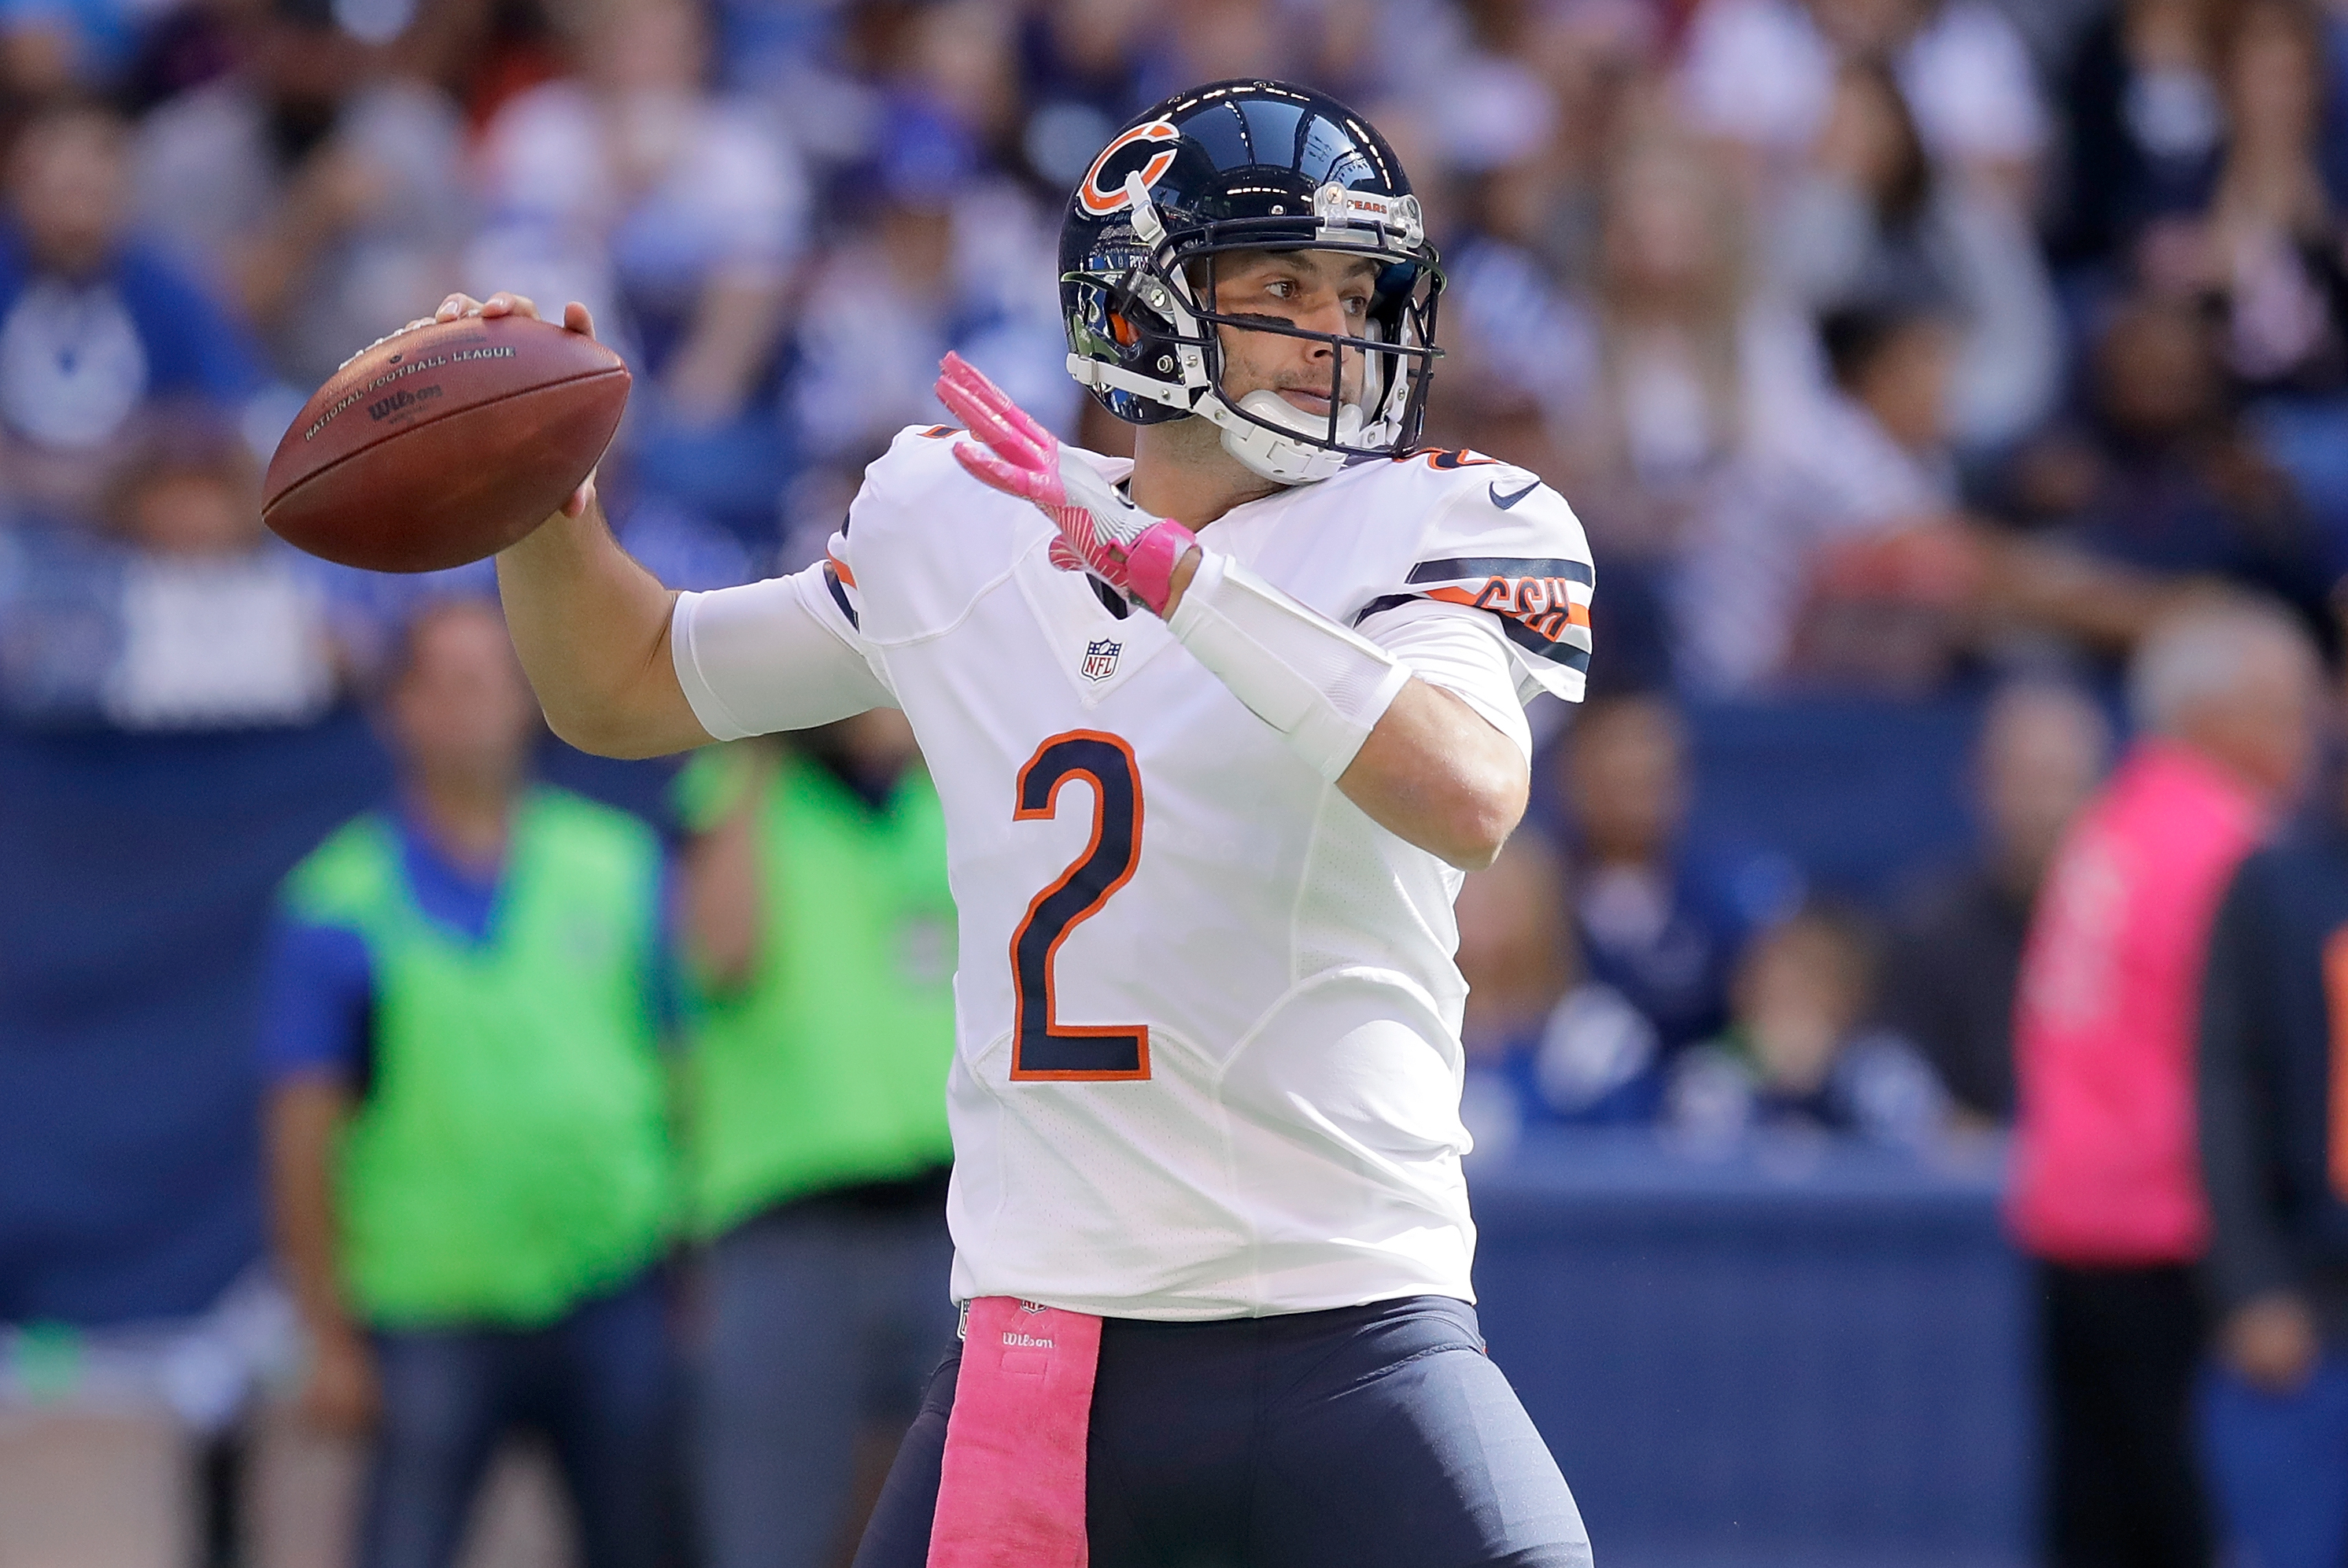 Brian Hoyer Injury: Updates on Bears QB's Recovery from Arm